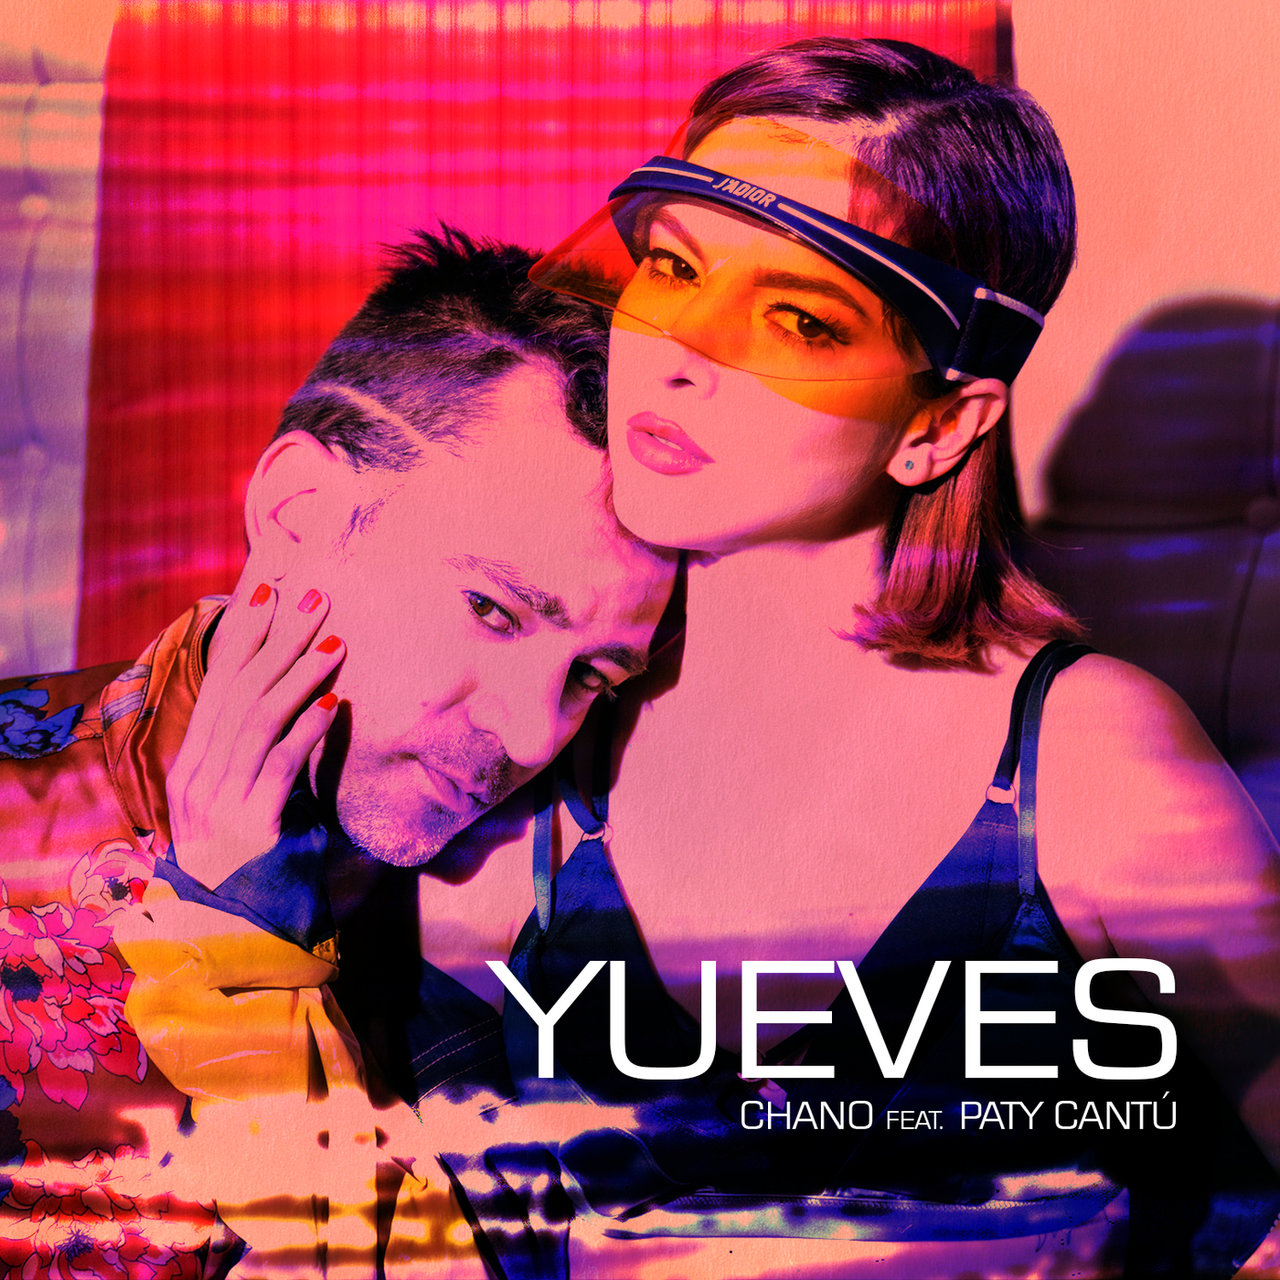 Chano featuring Paty Cantú — Yueves cover artwork